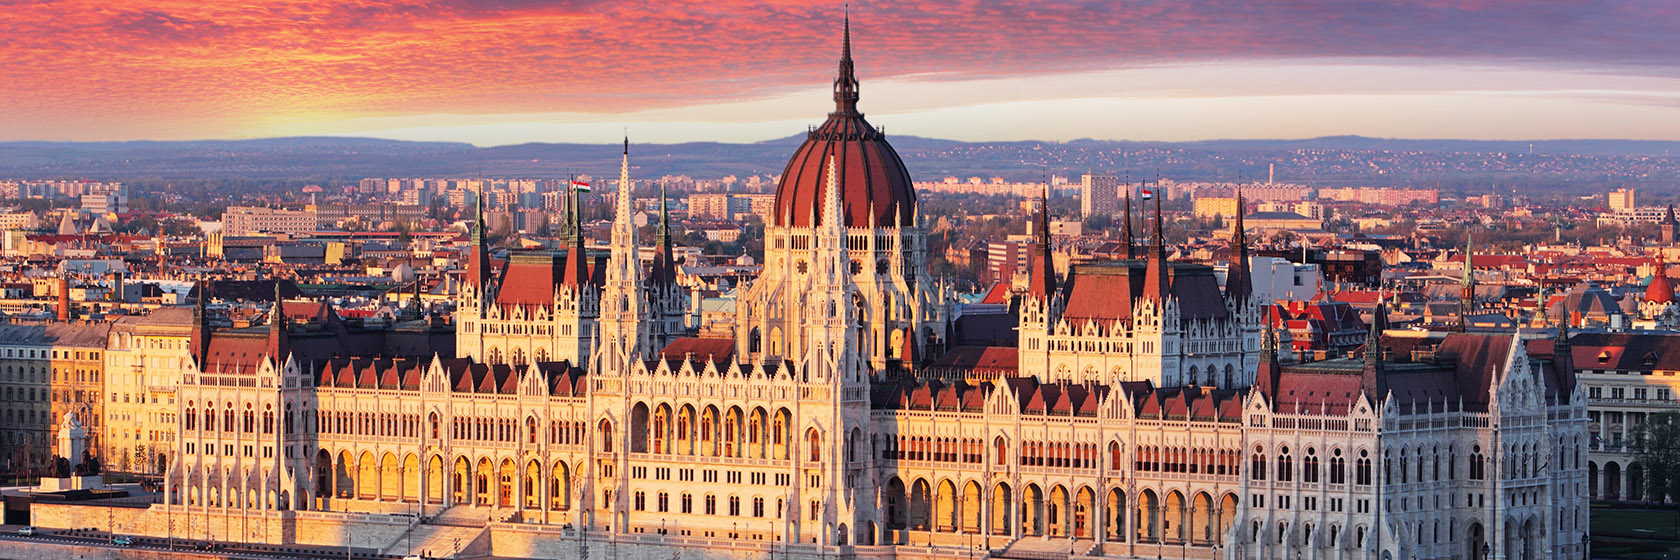 See the marvels of Eastern Europe with Abercrombie & Kent